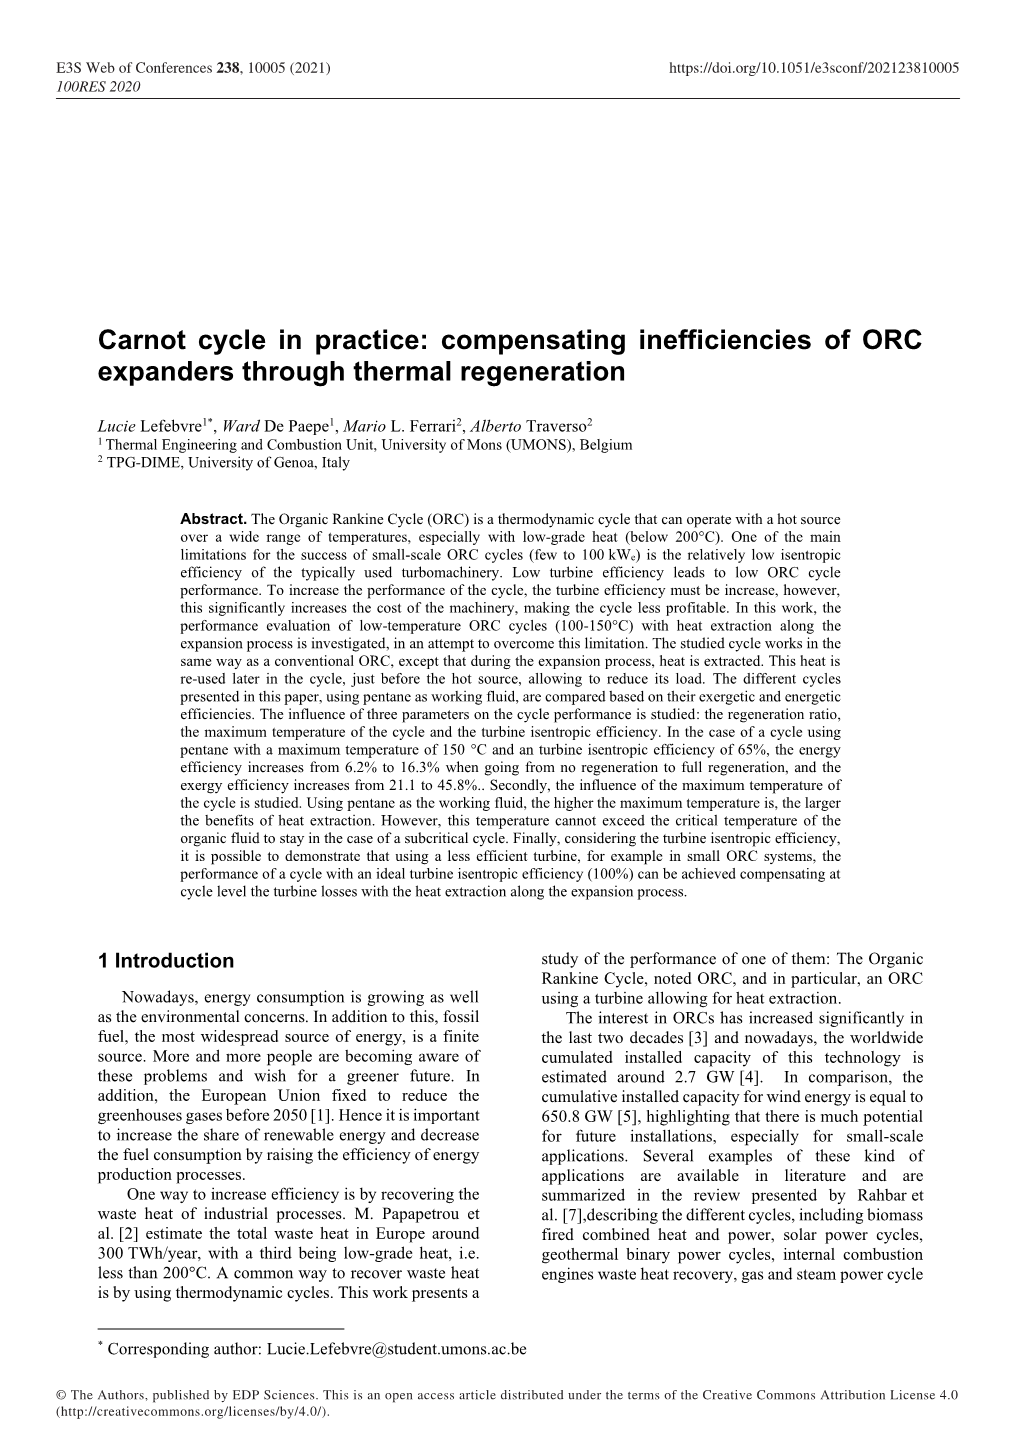 Carnot Cycle in Practice: Compensating Inefficiencies of ORC Expanders Through Thermal Regeneration